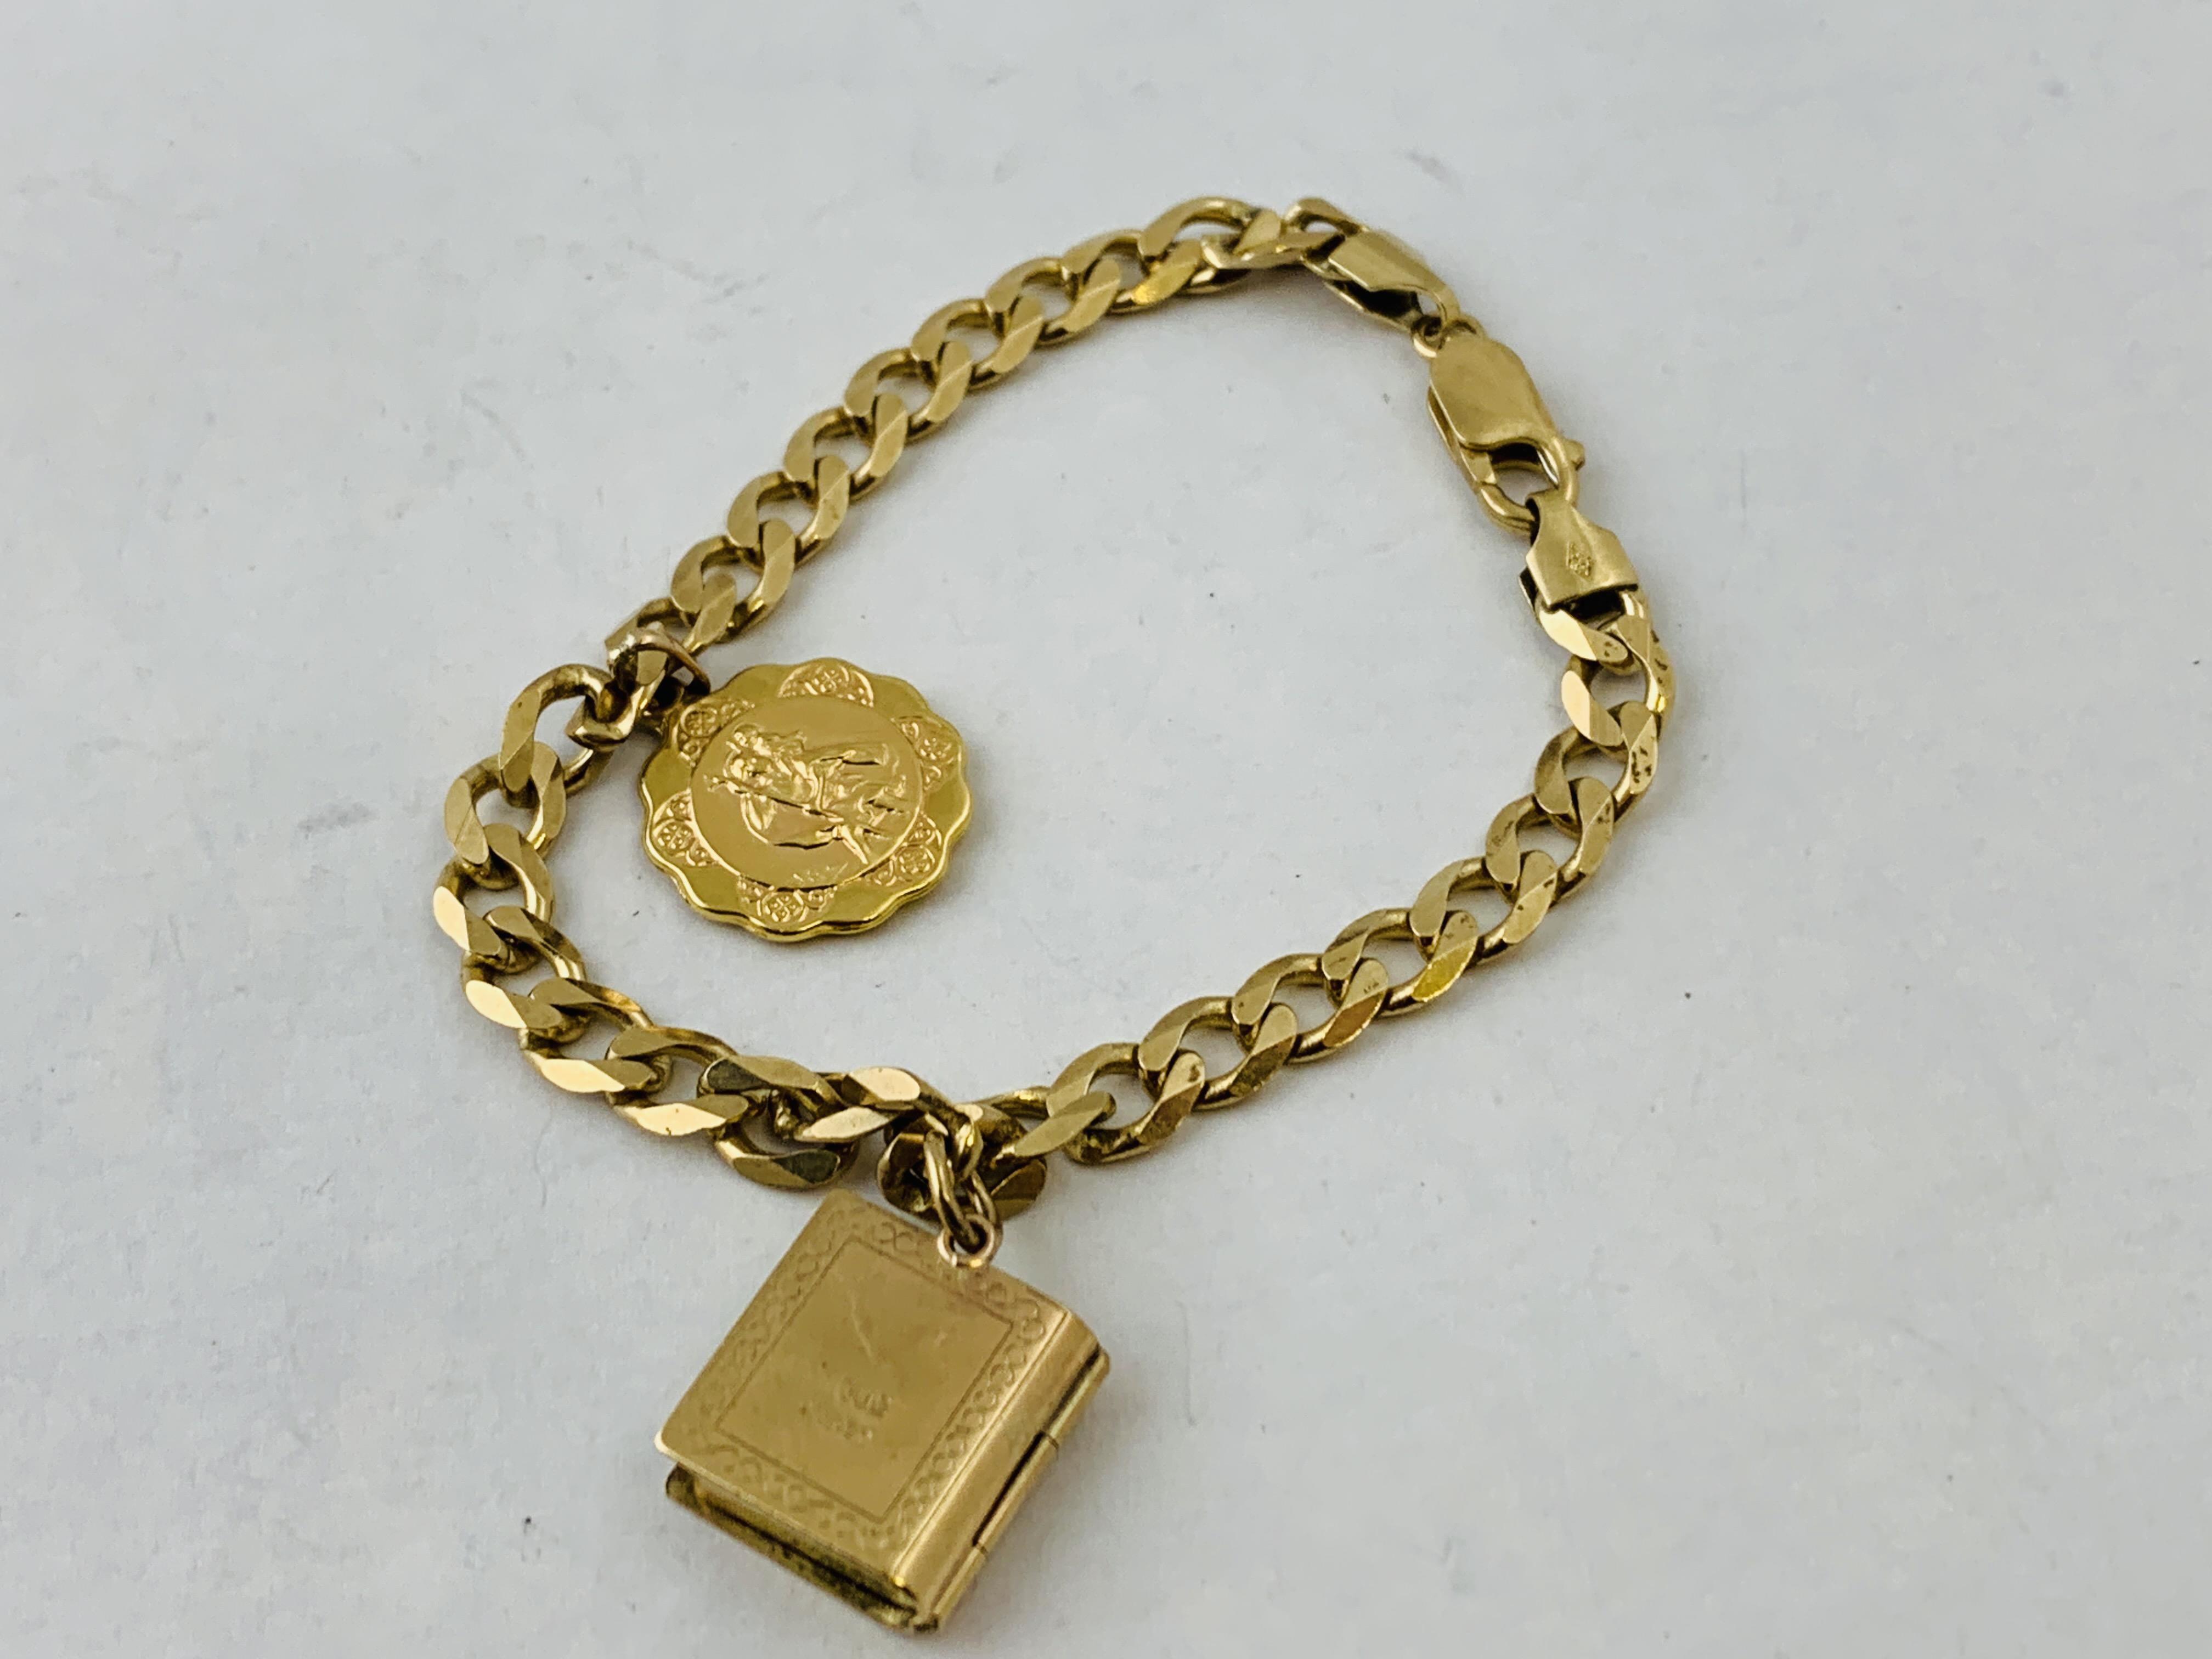 A 9CT GOLD FLAT LINK BRACELET WITH 9CT GOLD ST CHRISTOPHER AND BOOK CHARM ATTACHED